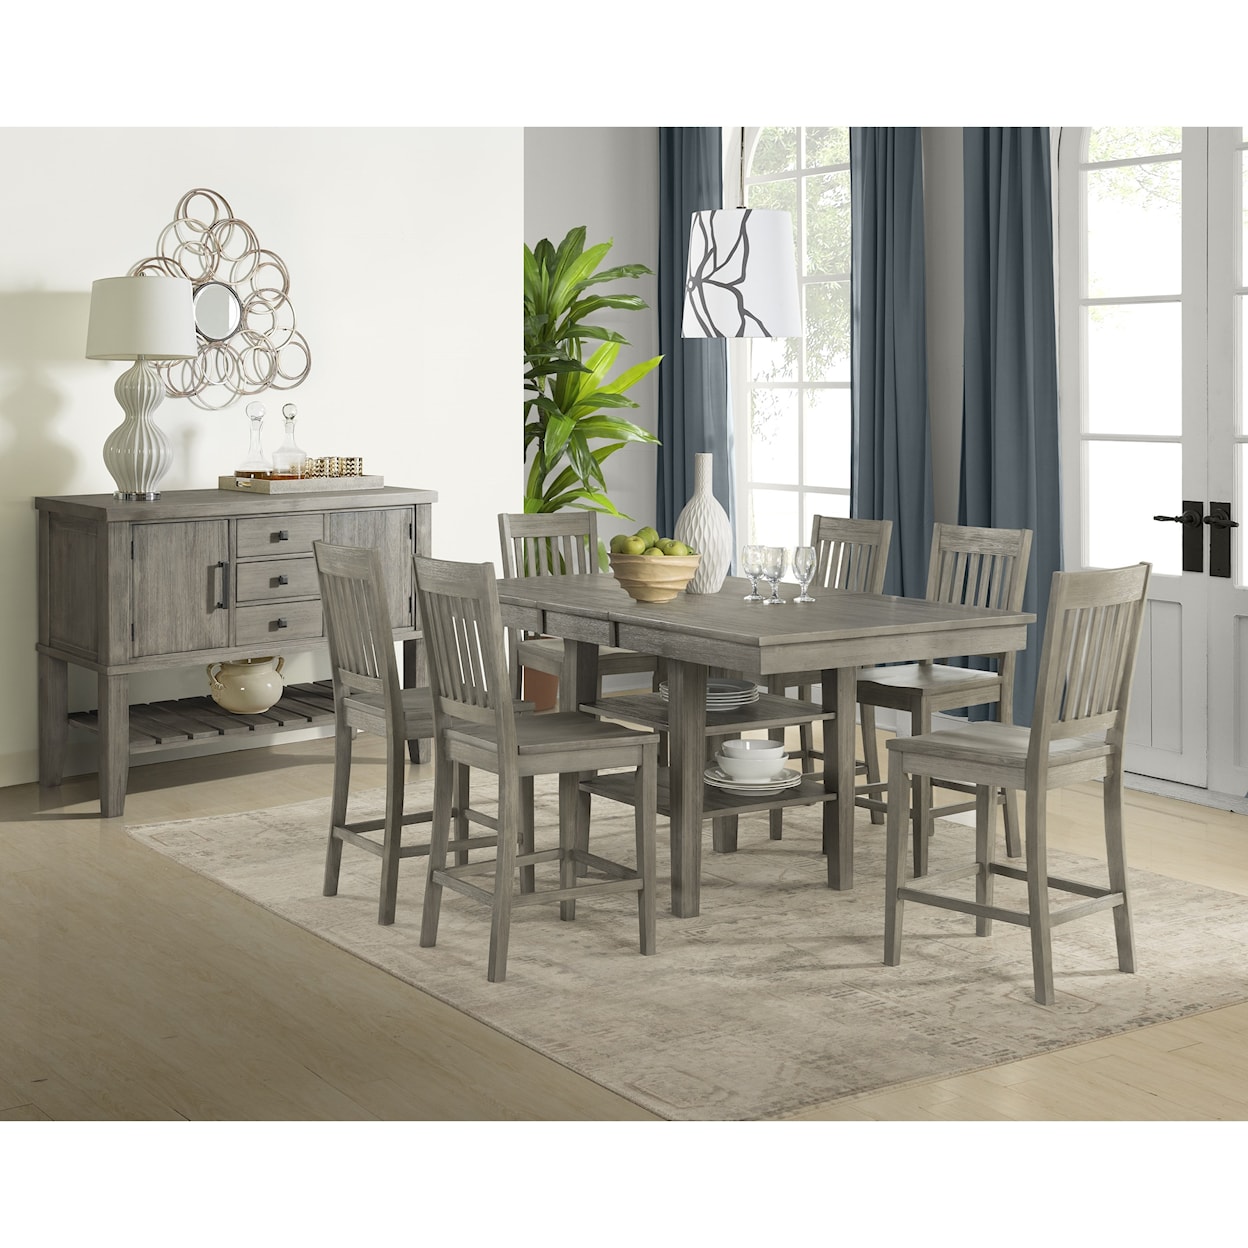 AAmerica Huron Formal Dining Room Goup